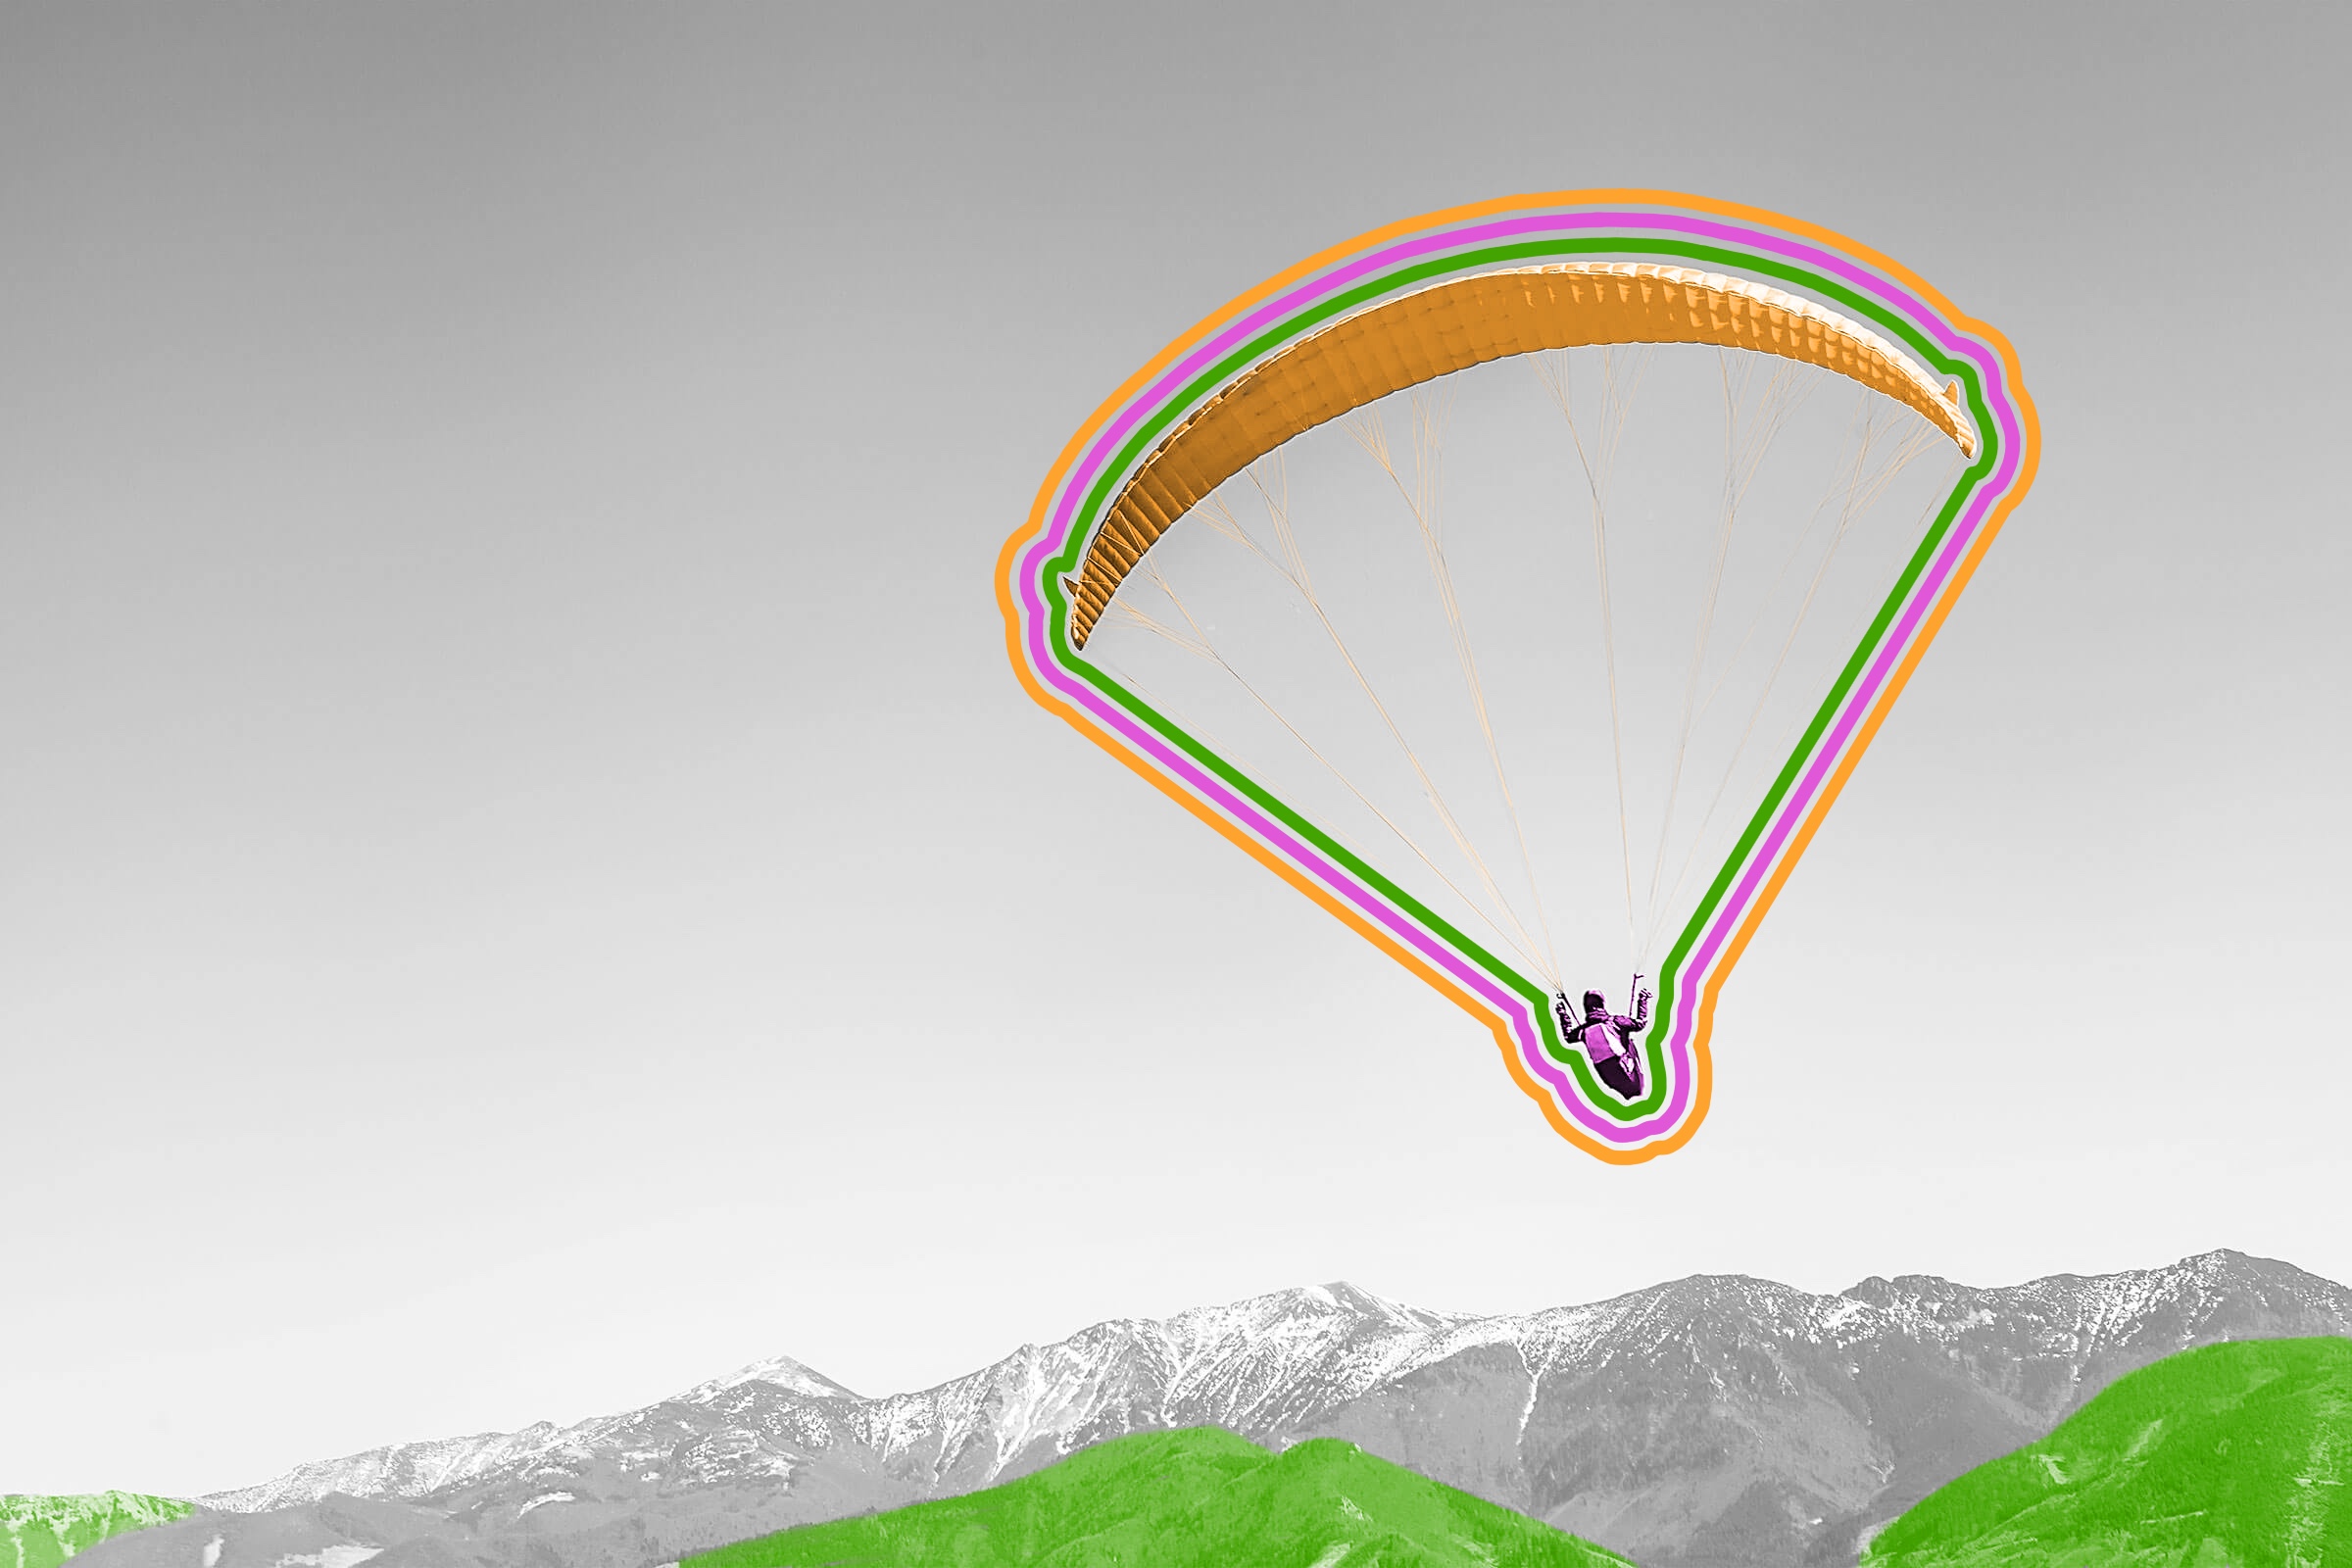 Parachutes were invented before airplanes.